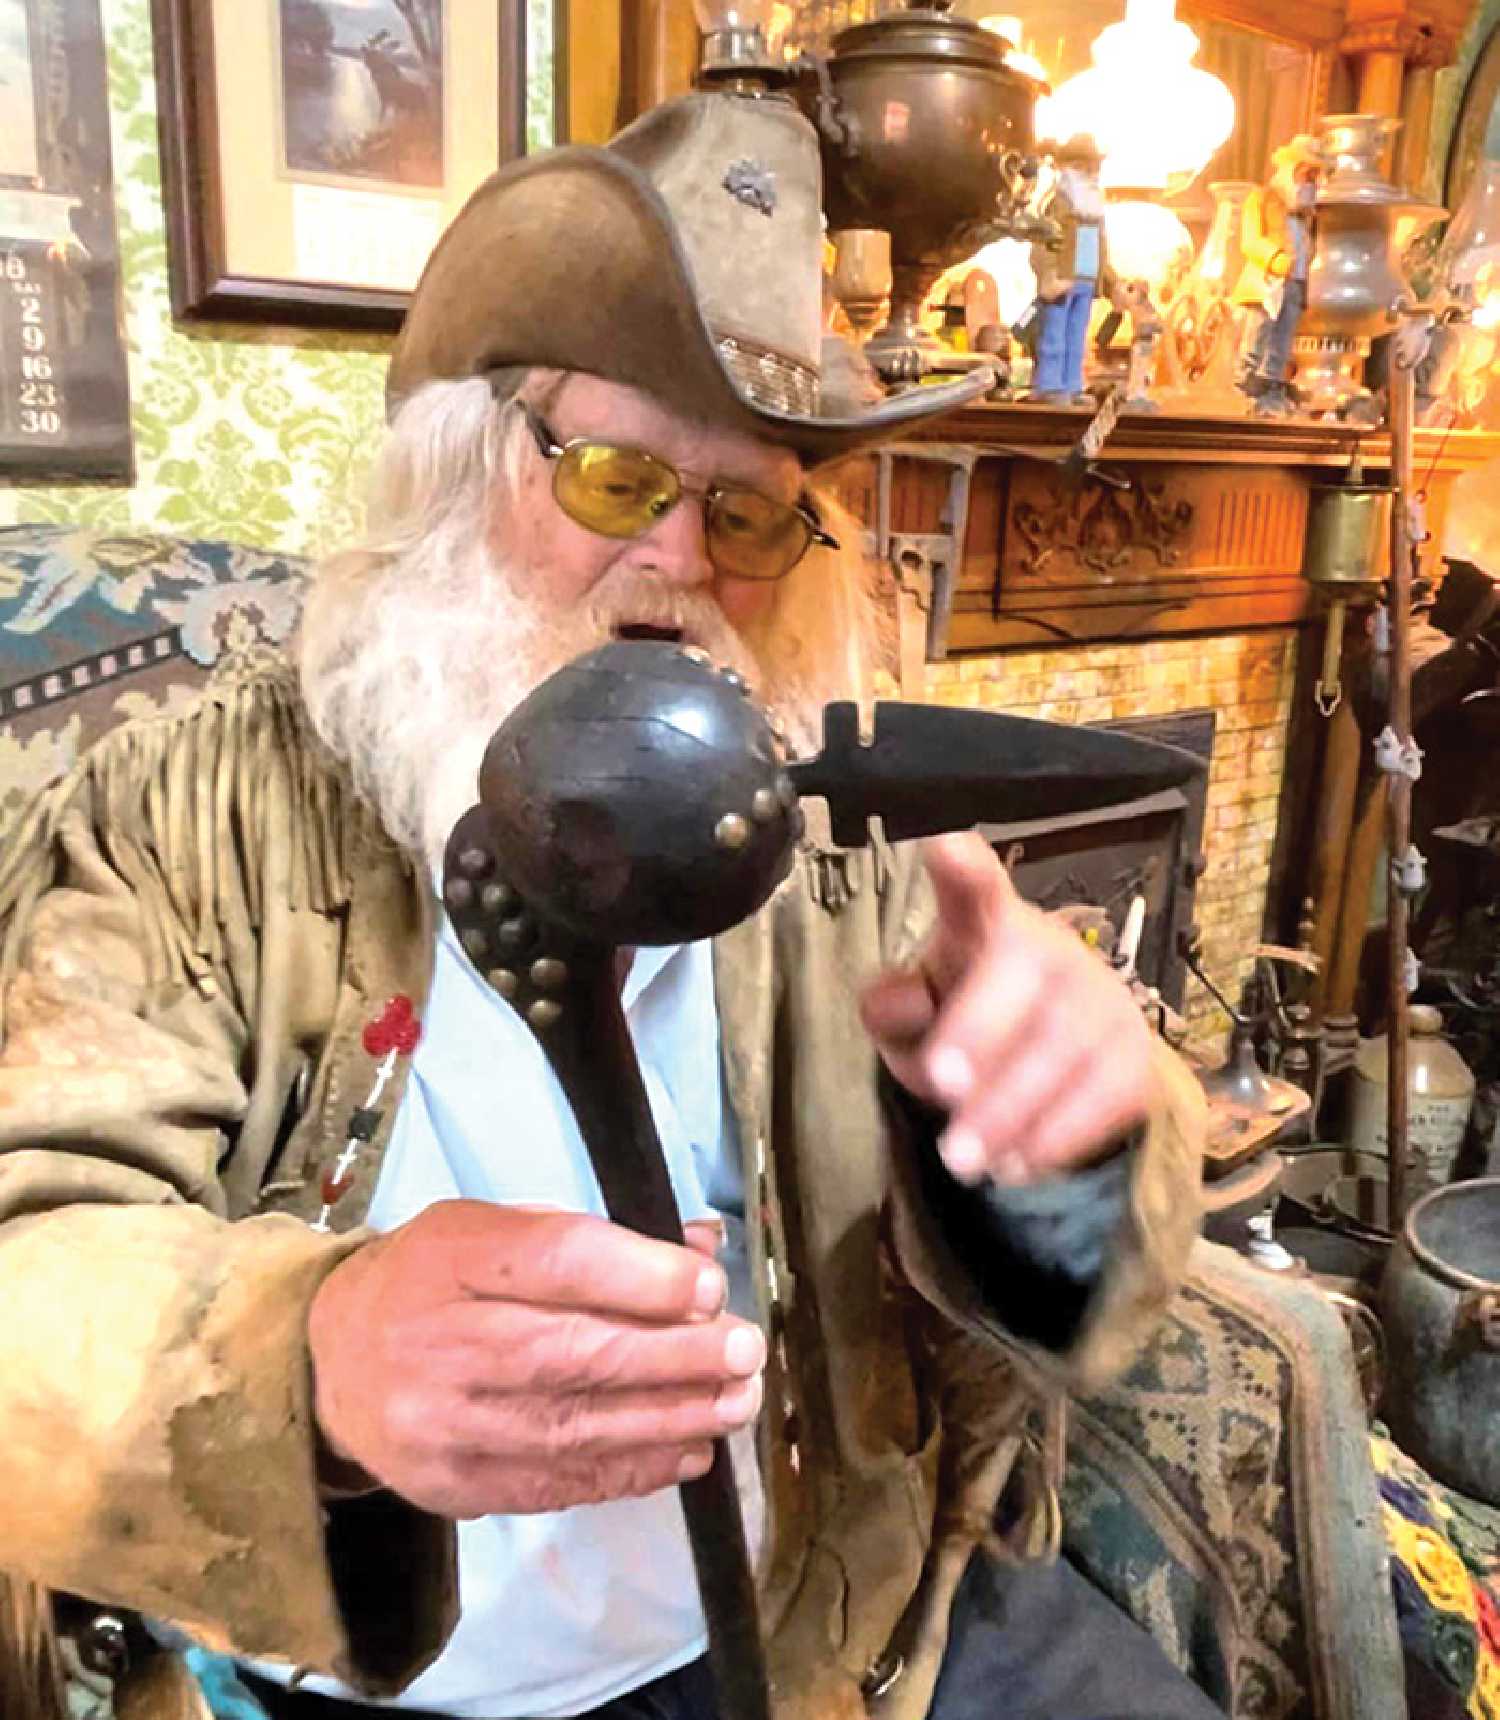 A special artifact dating back to the 1850s has been stolen from Old Georges Museum & Hidden Village, a famous roadside attraction in Whitewood. Seen here, George Chopping holds the item previous to its disappearance, a black war club embellished with brass buttons and a metal point.